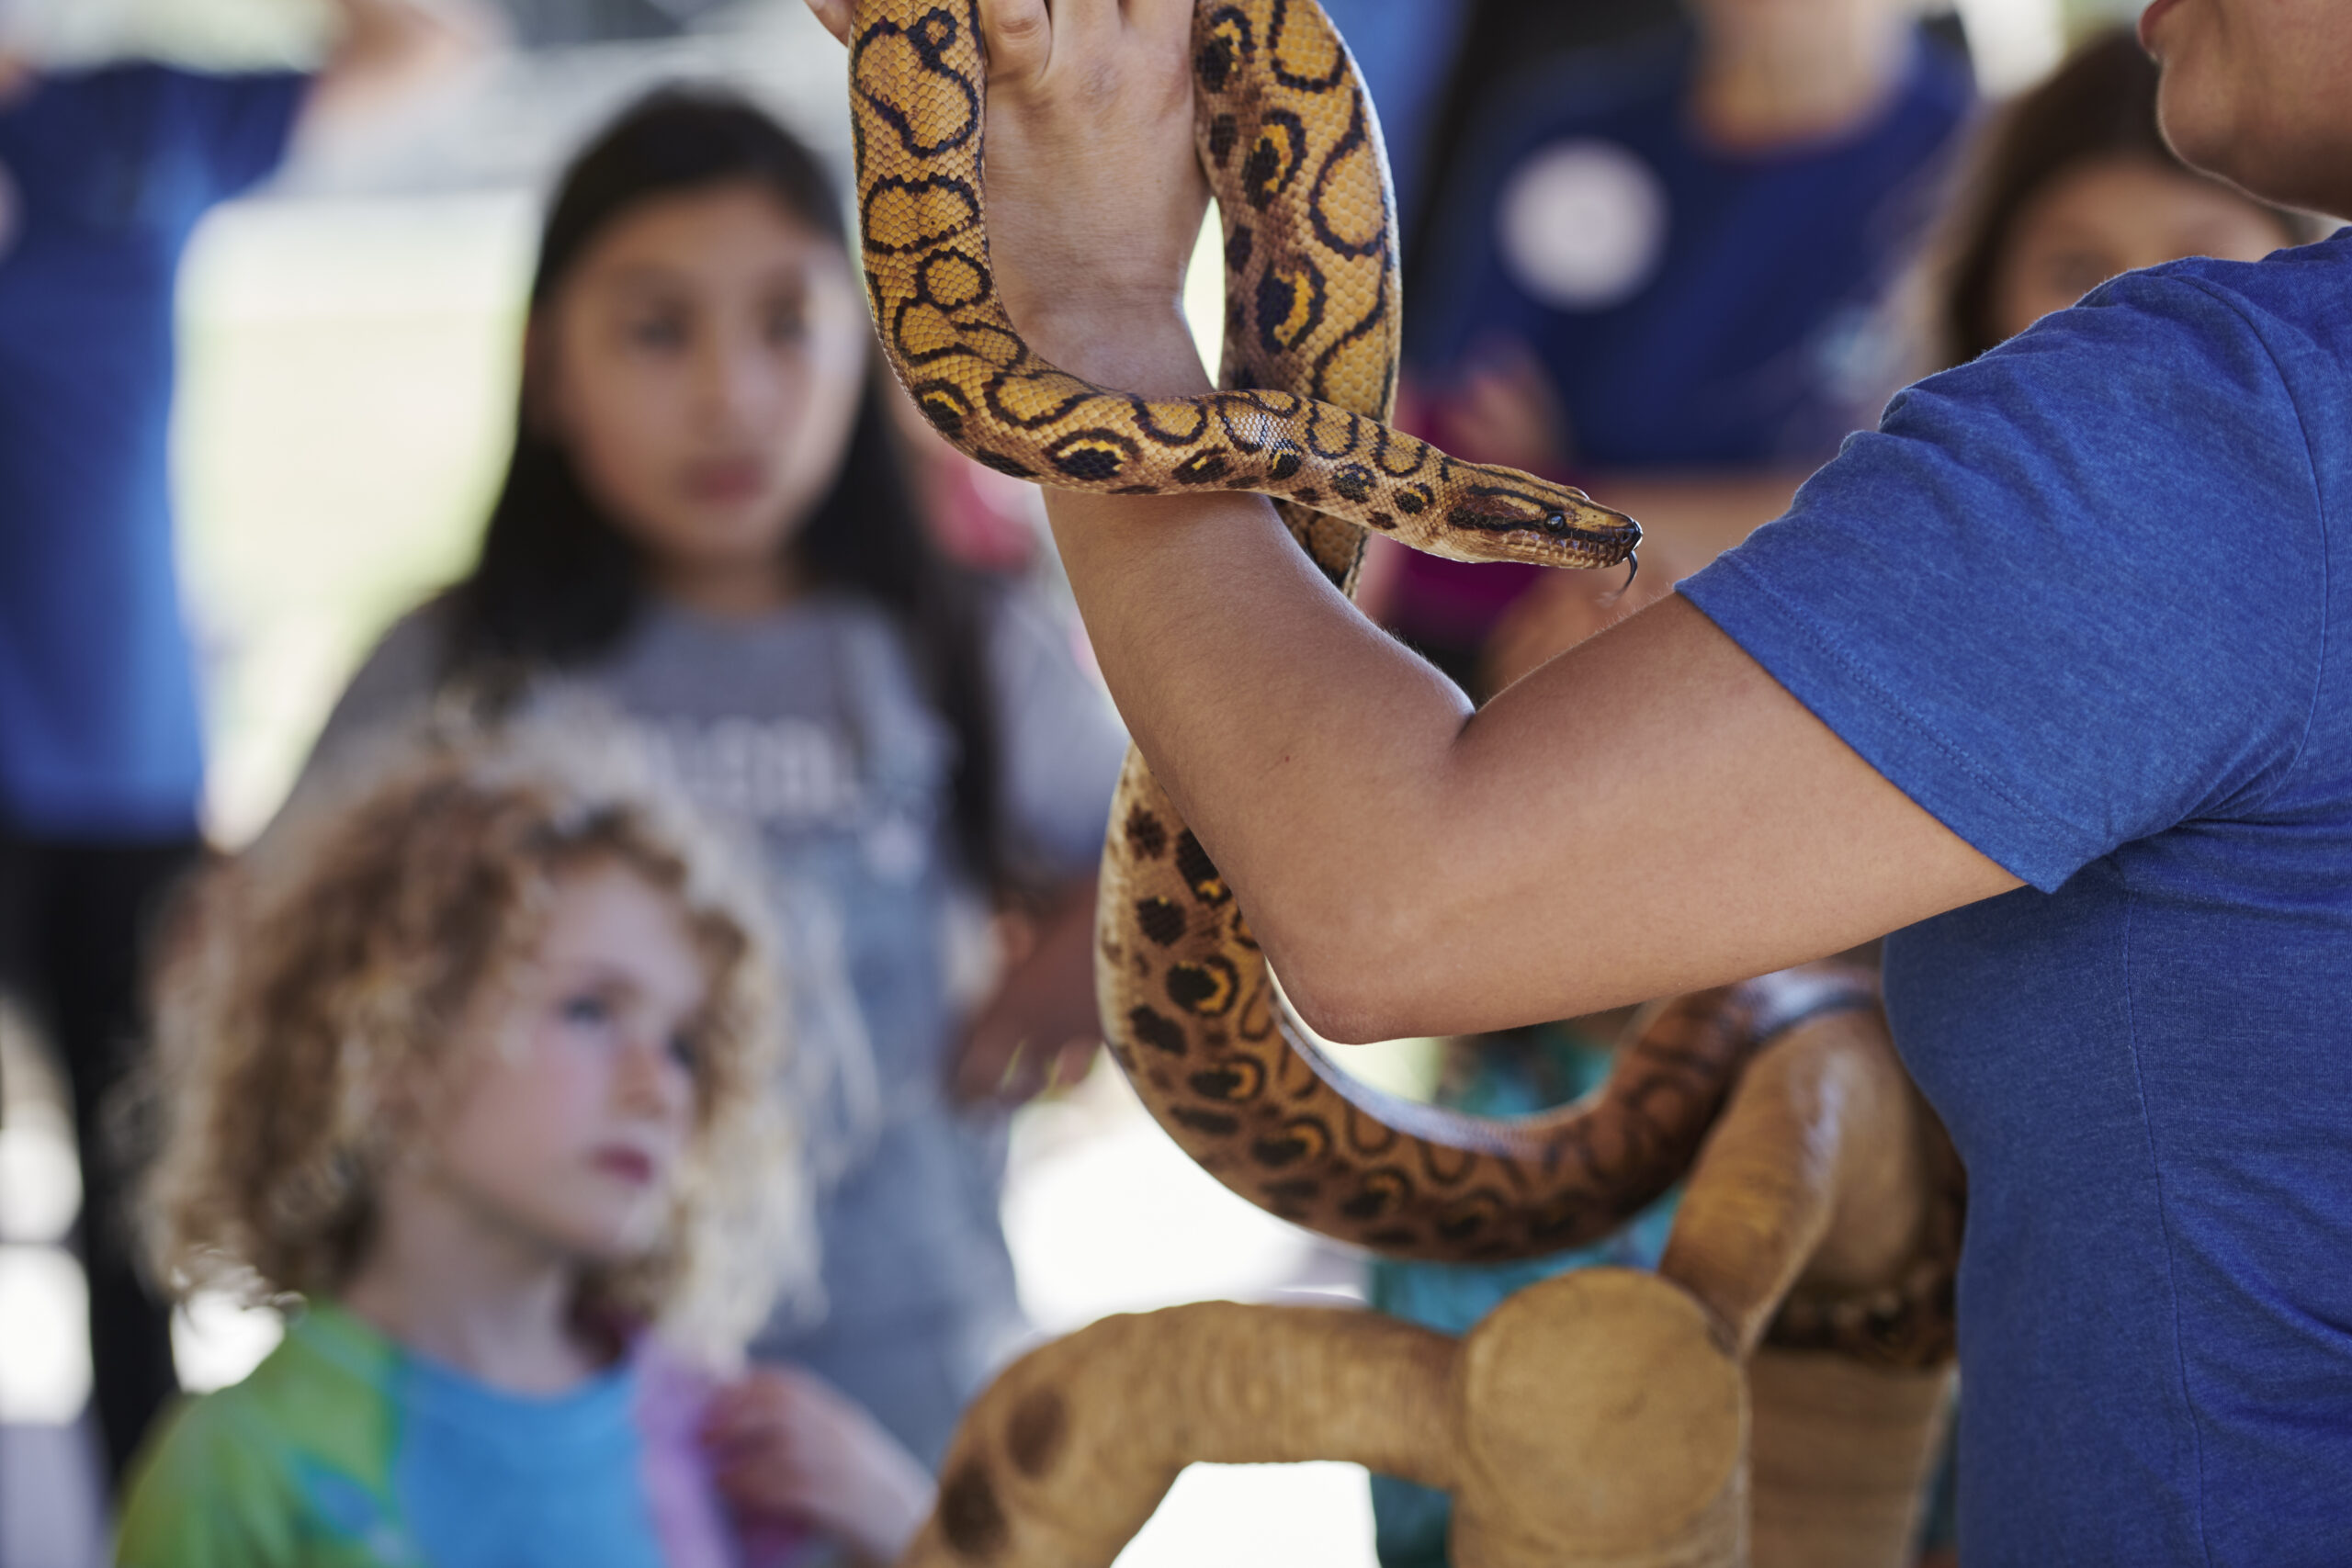 Children watching Lawrence staff holding snake